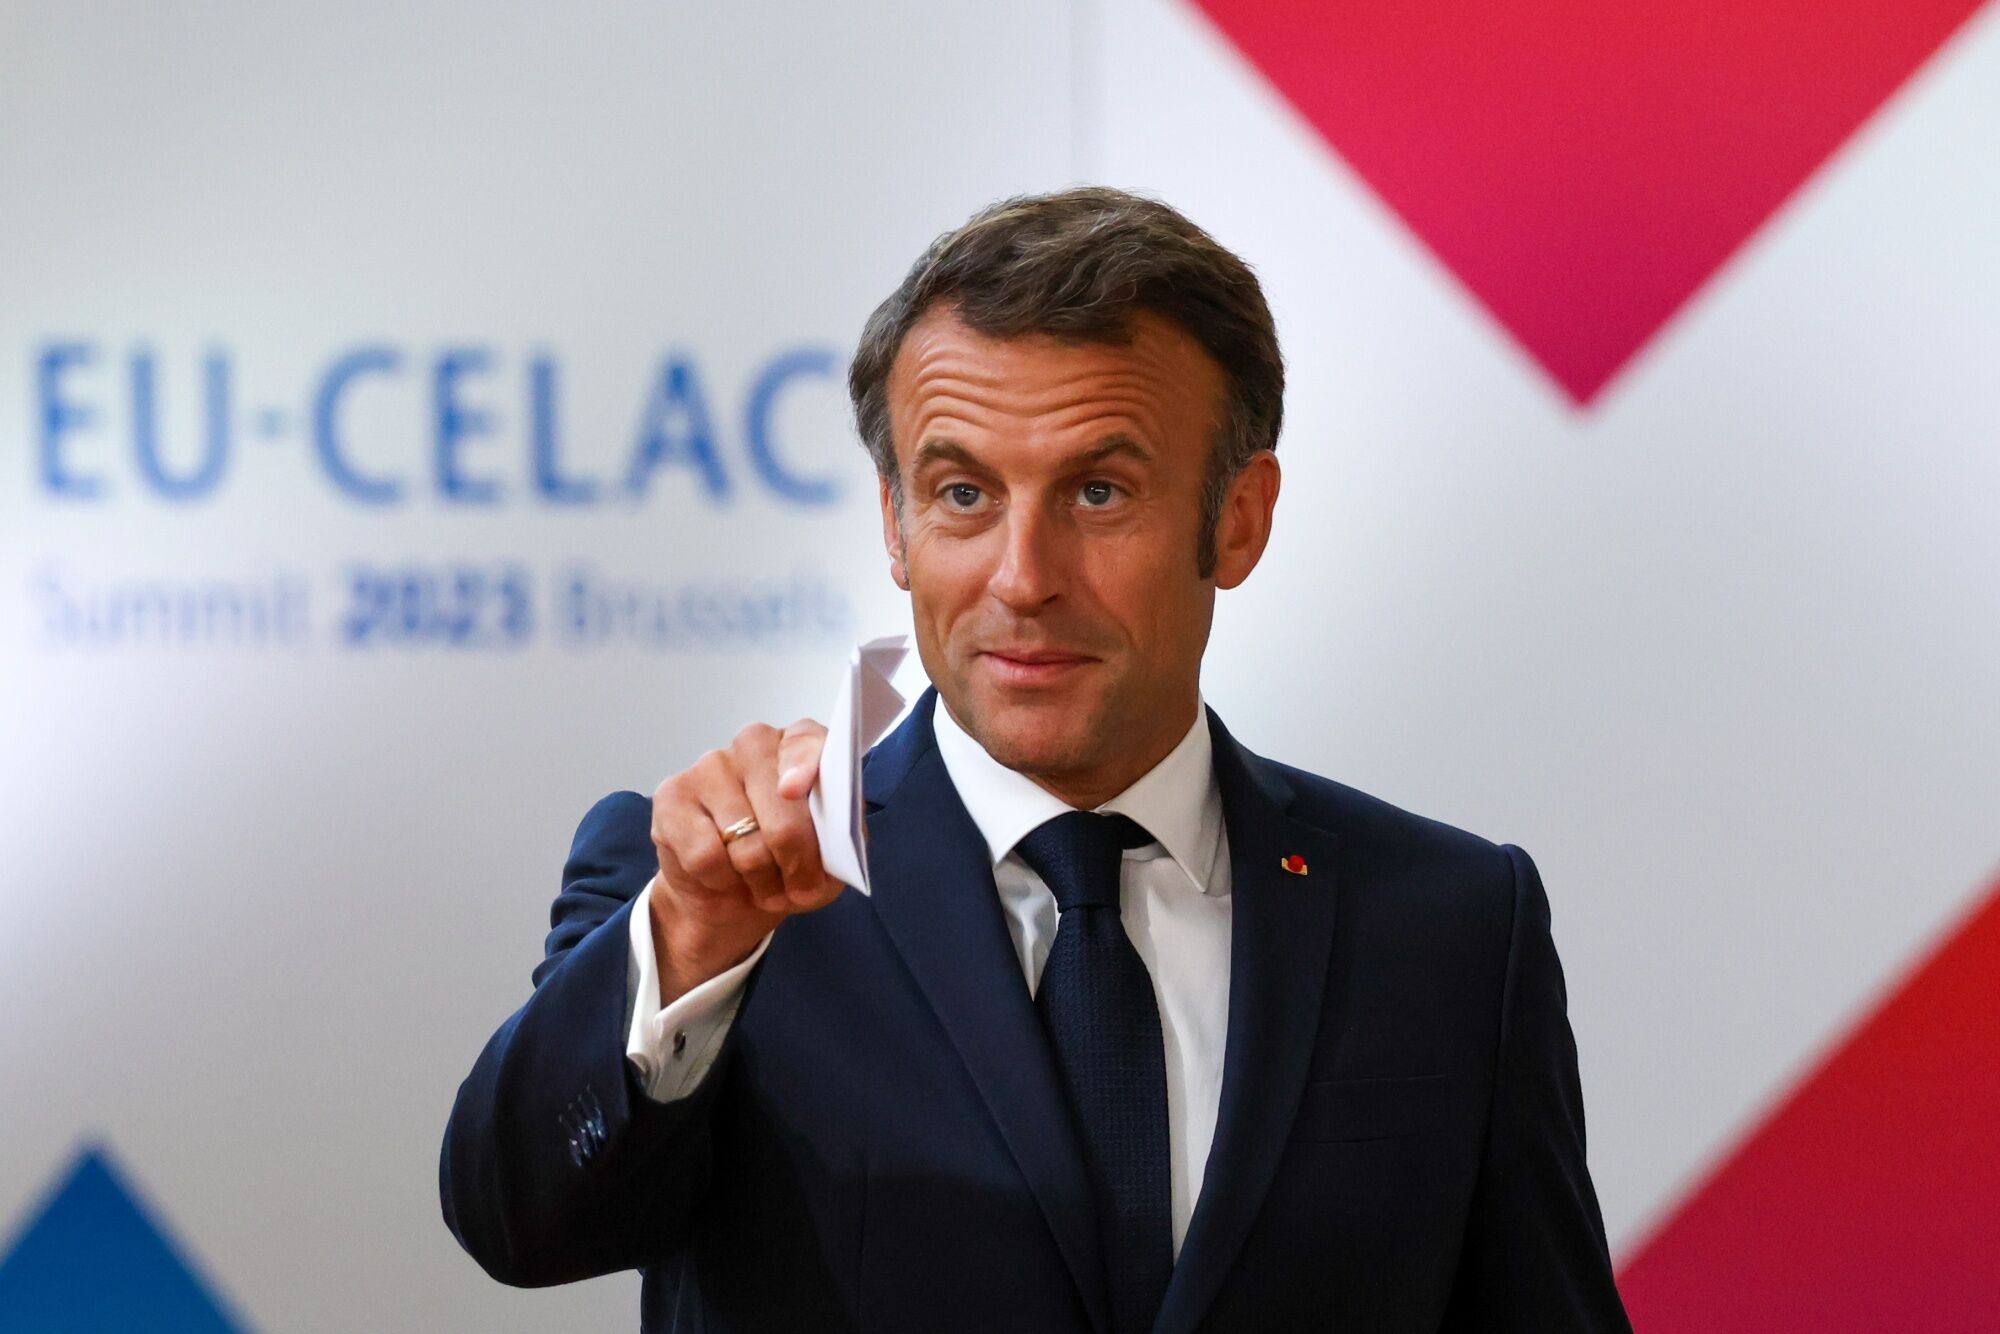 French President Emmanuel Macron attends the European Union and Community of Latin American and Caribbean States summit in Brussels on Tuesday. Photo: Bloomberg